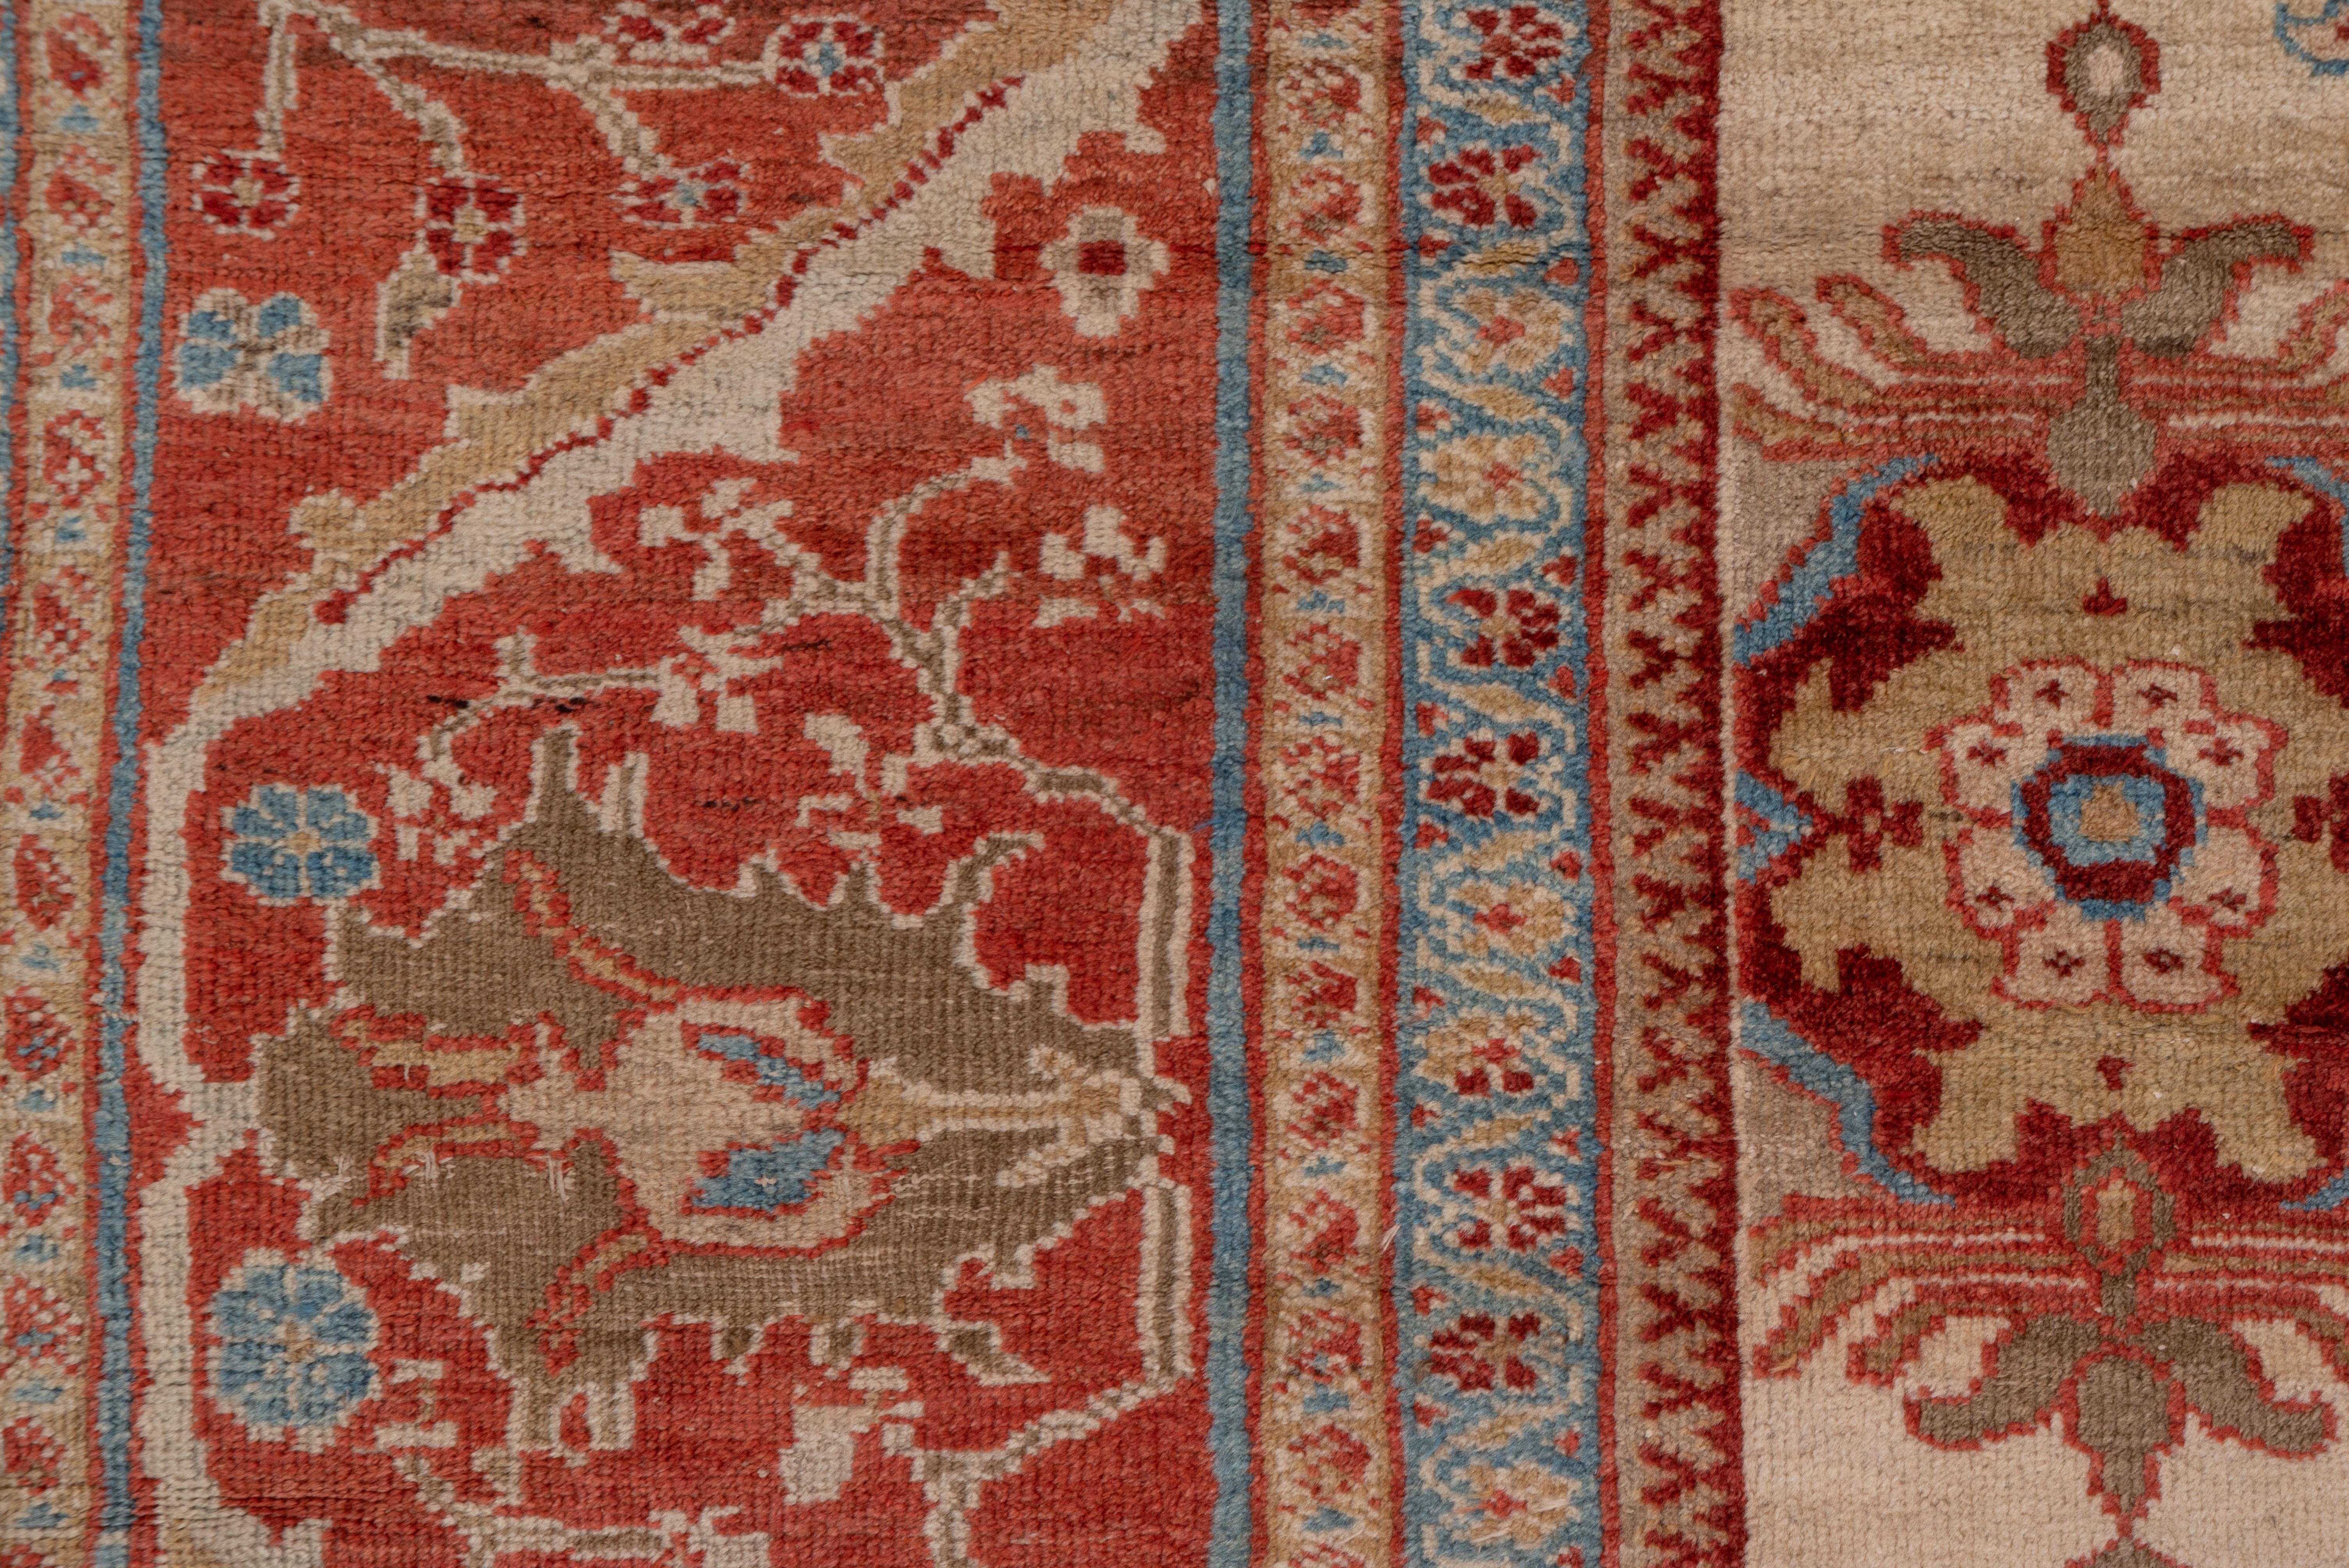 Wool Antique Sultanabad Carpet All-Over Field, Cream Field, Bright Red & Blue Borders For Sale